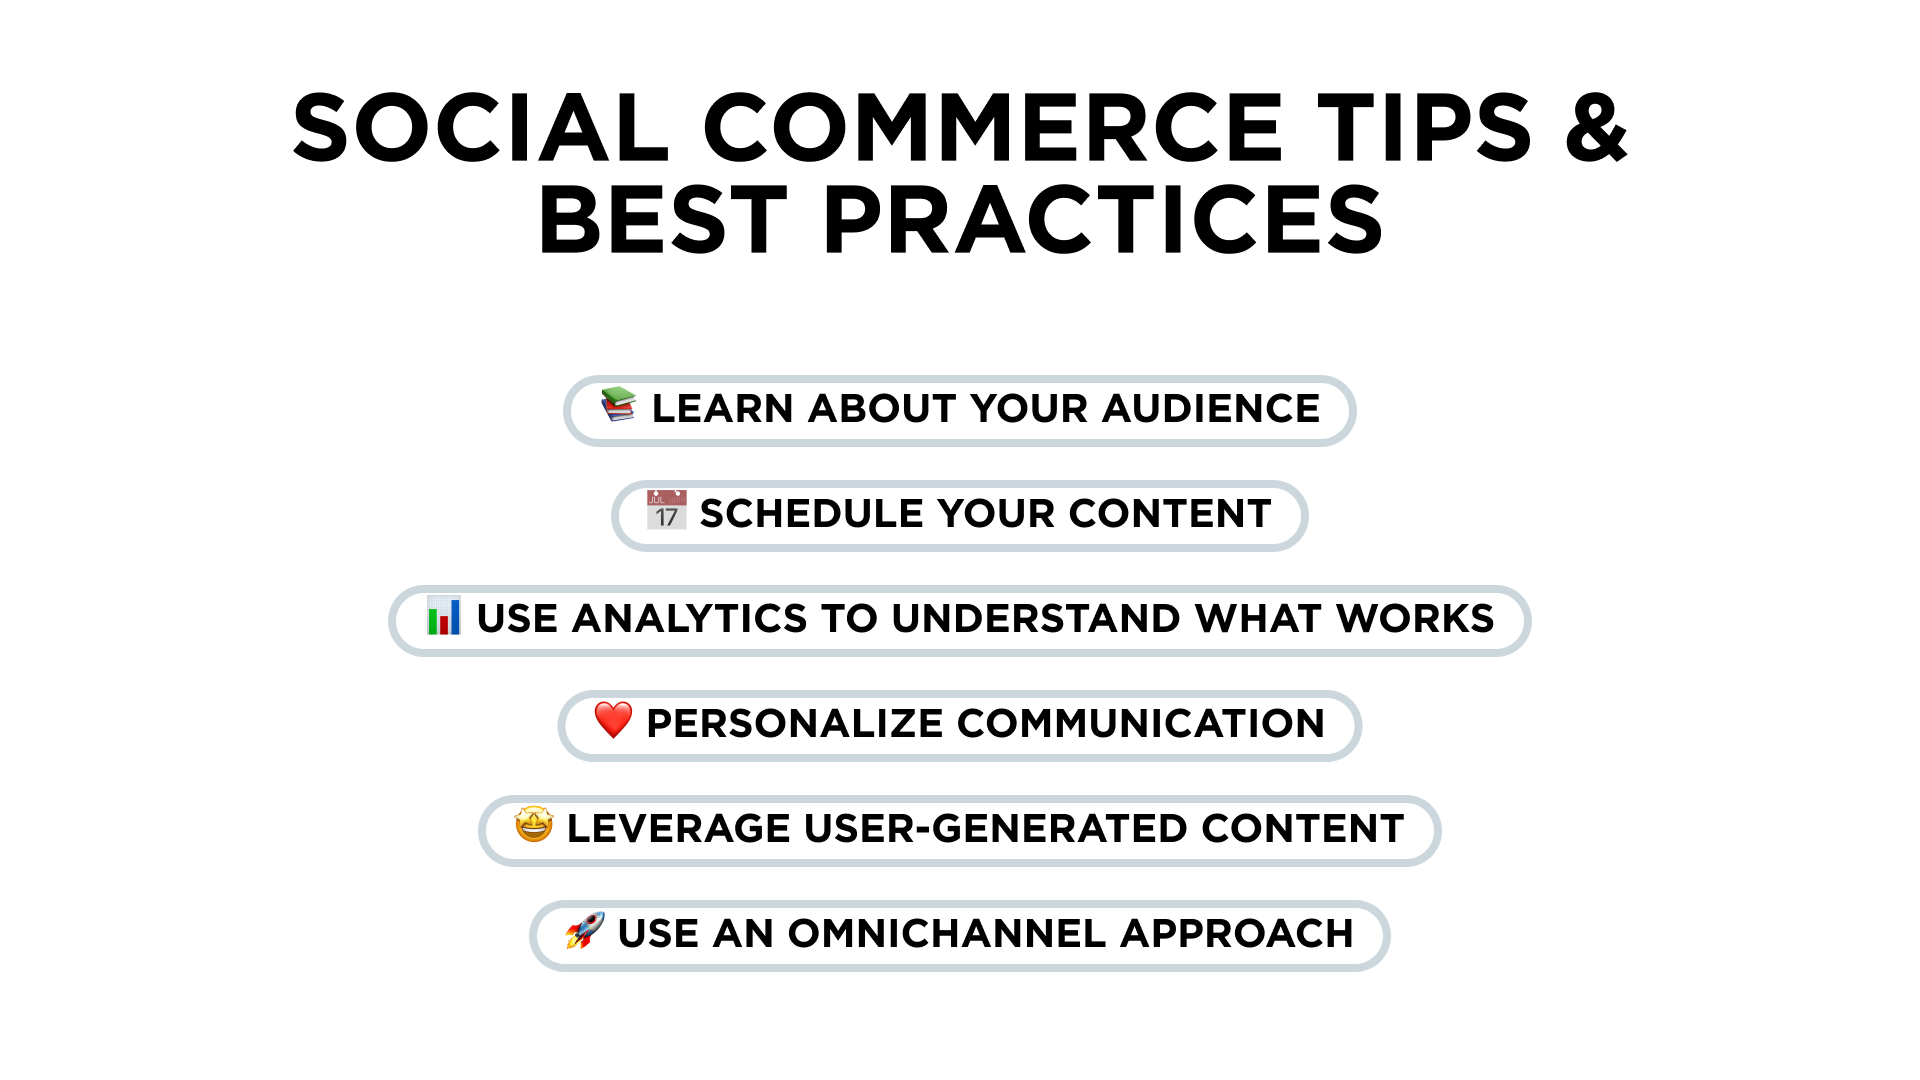 Social commerce tips and best practices